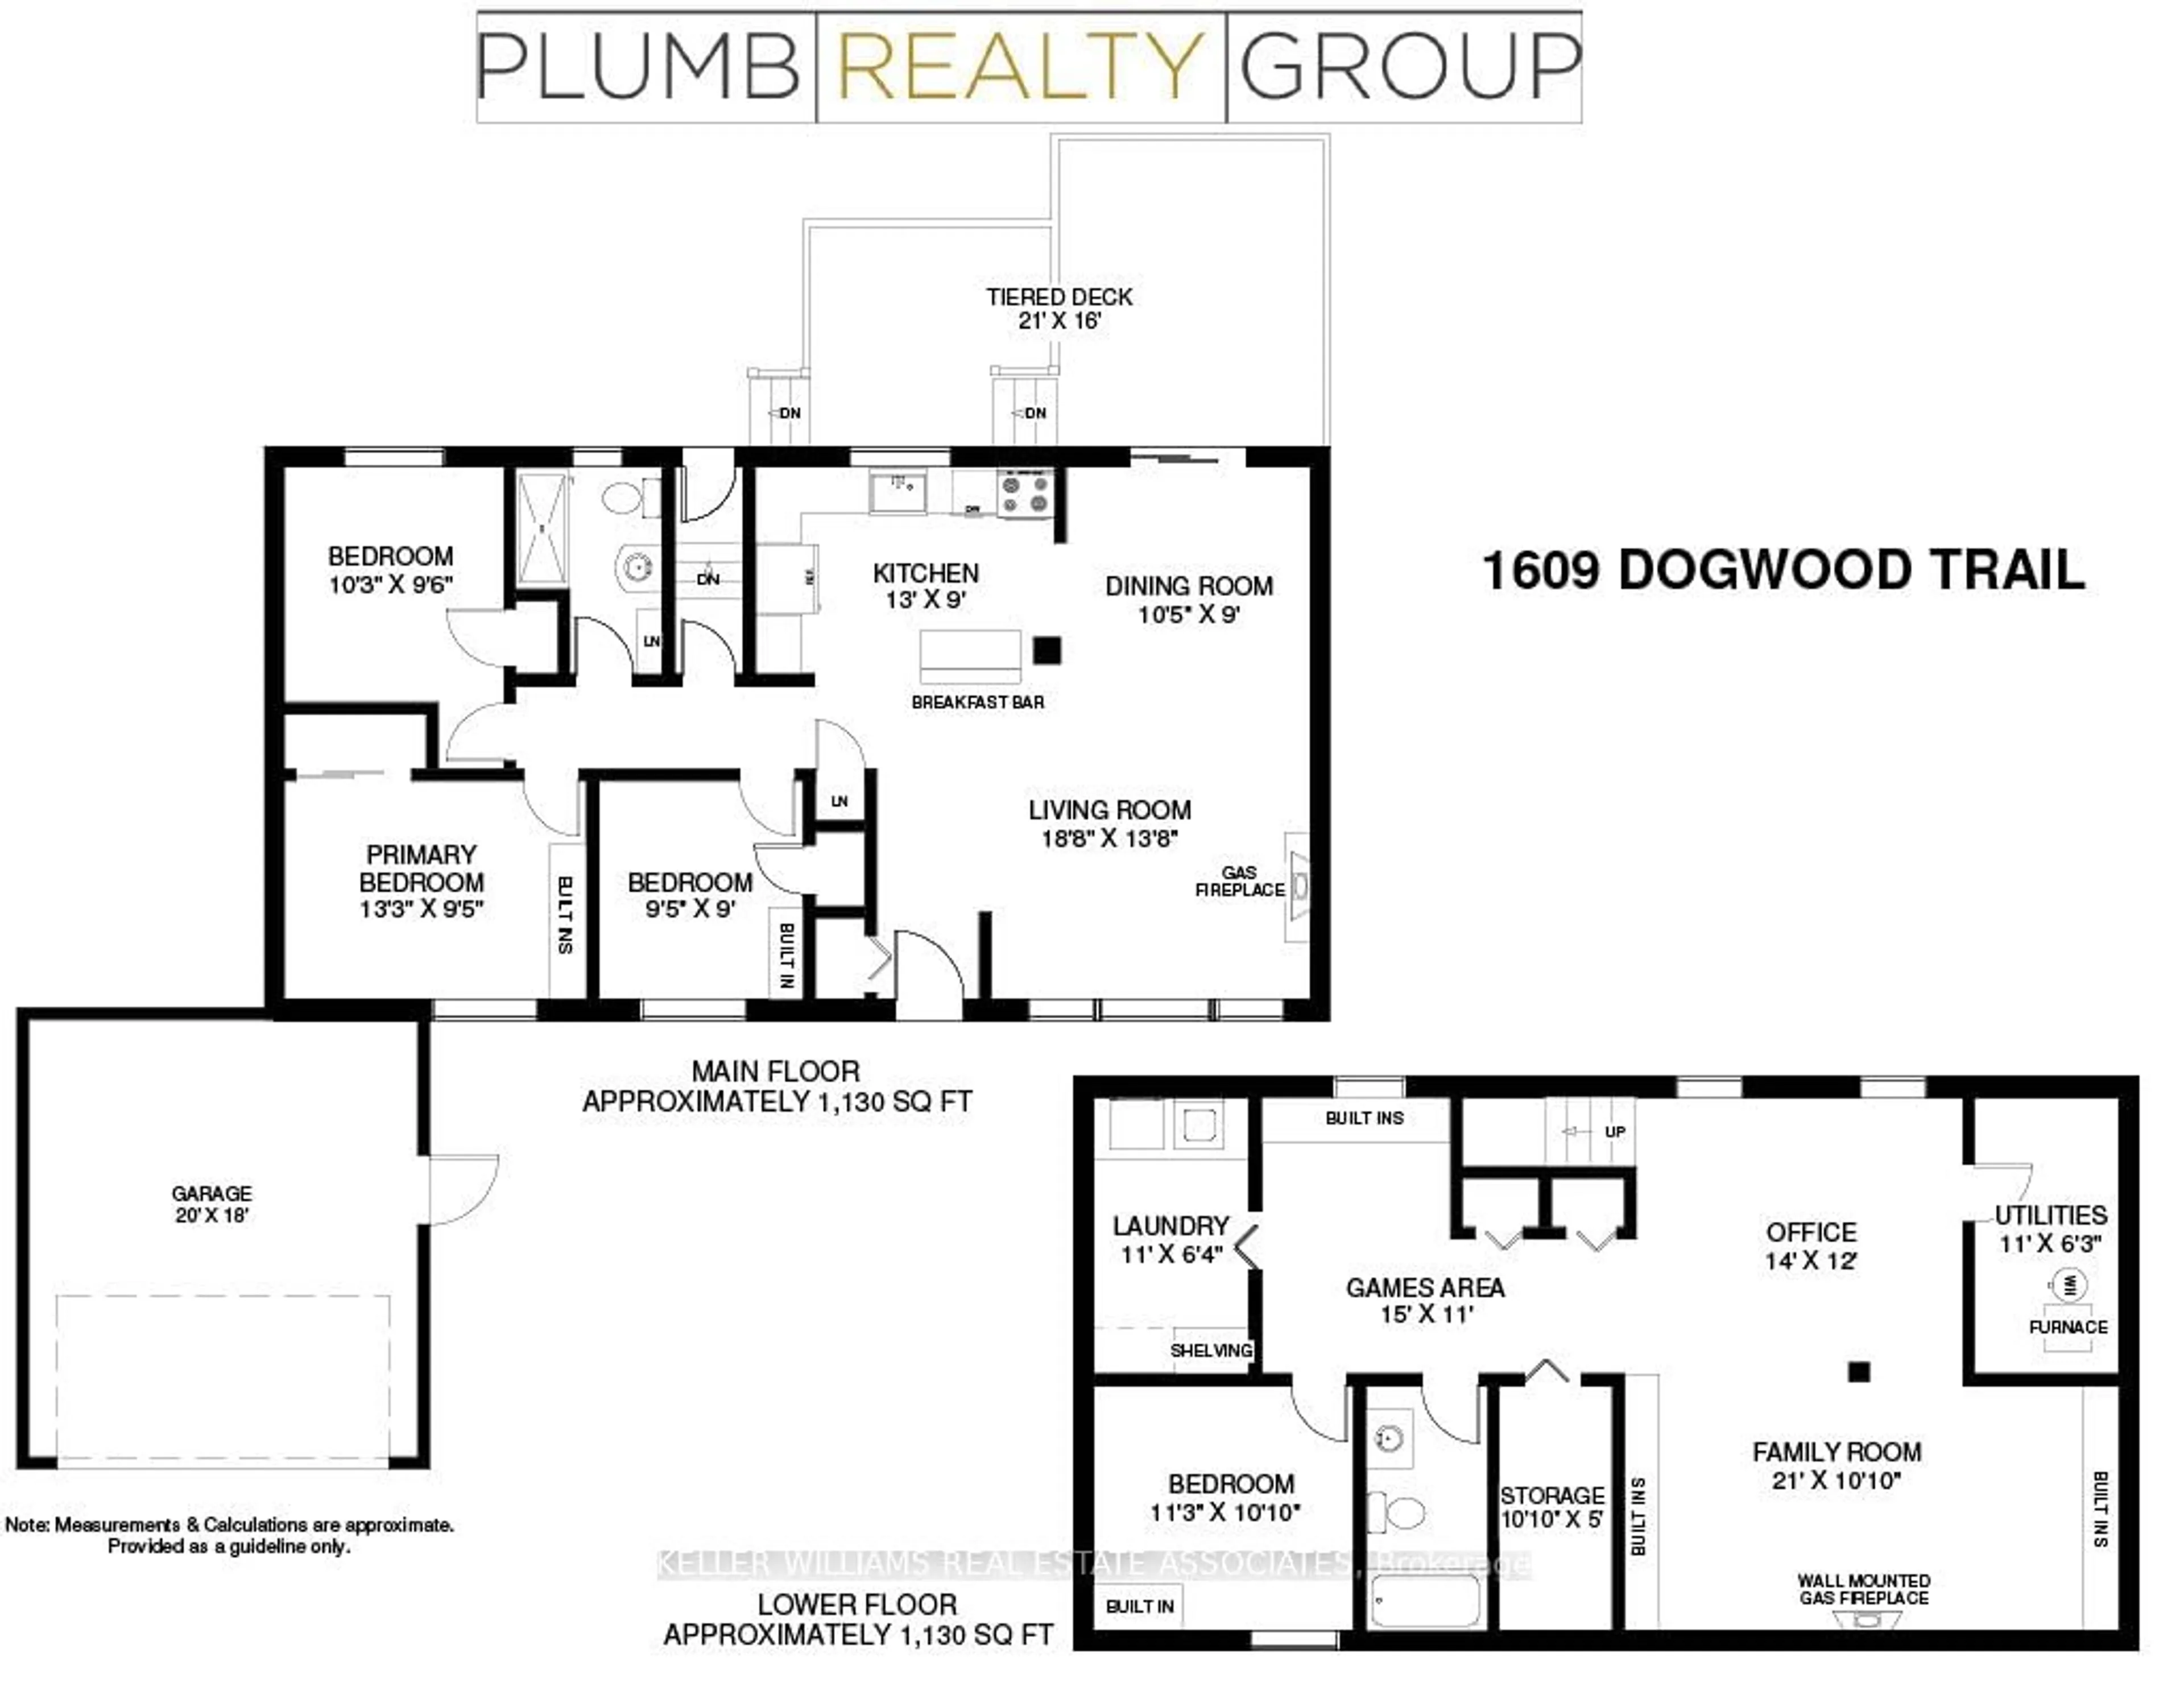 Floor plan for 1609 Dogwood Tr, Mississauga Ontario L5G 3A4